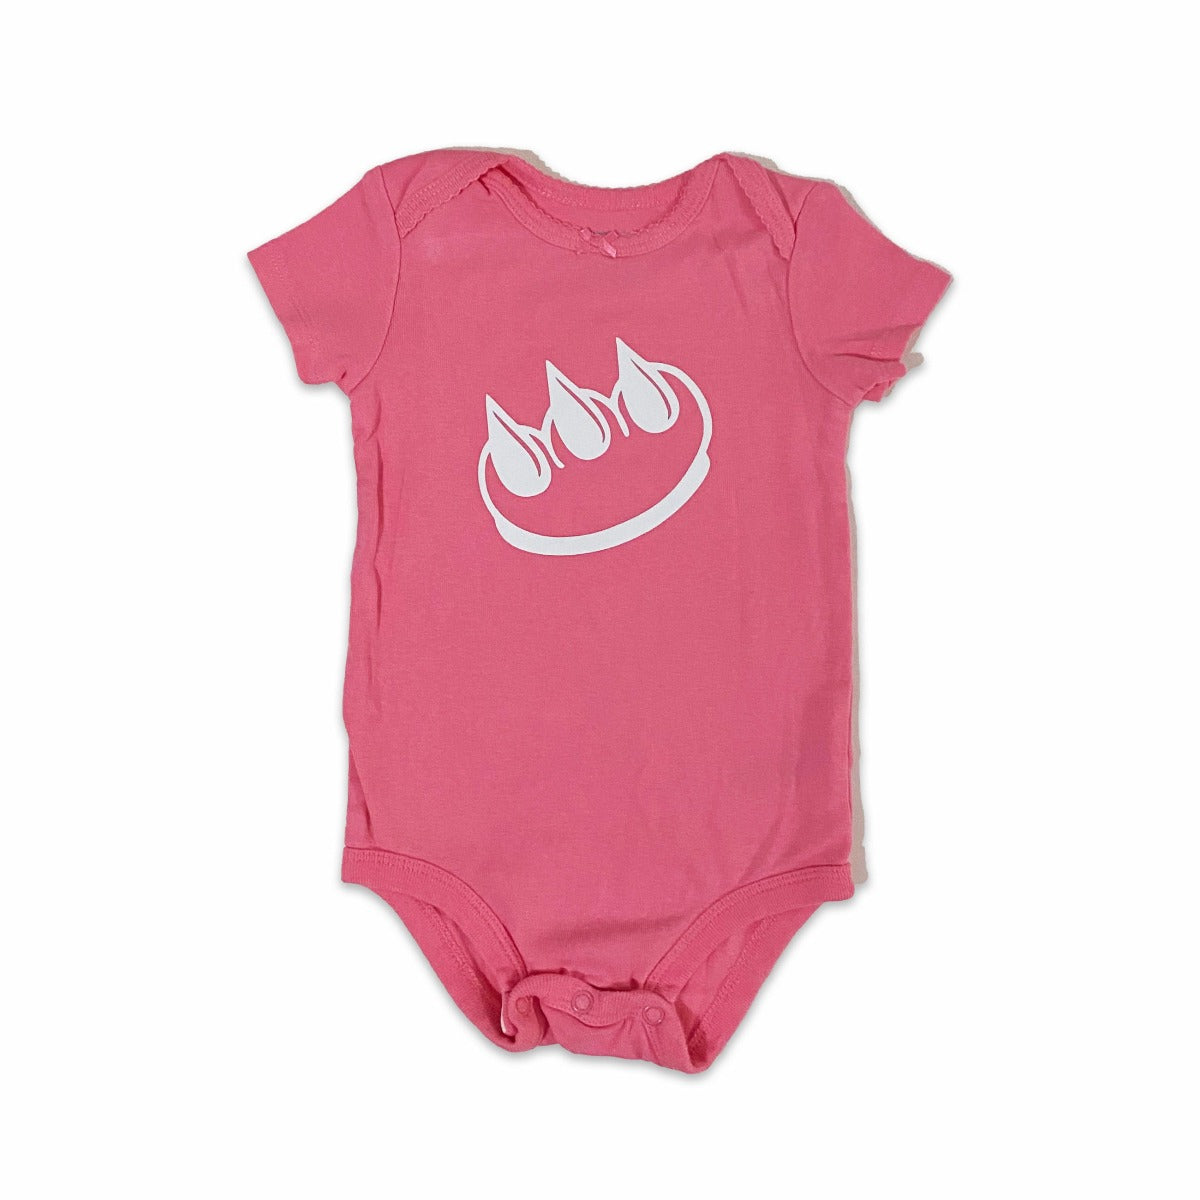 PINK AND WHITE CLAW MONEY BABY ONESIE